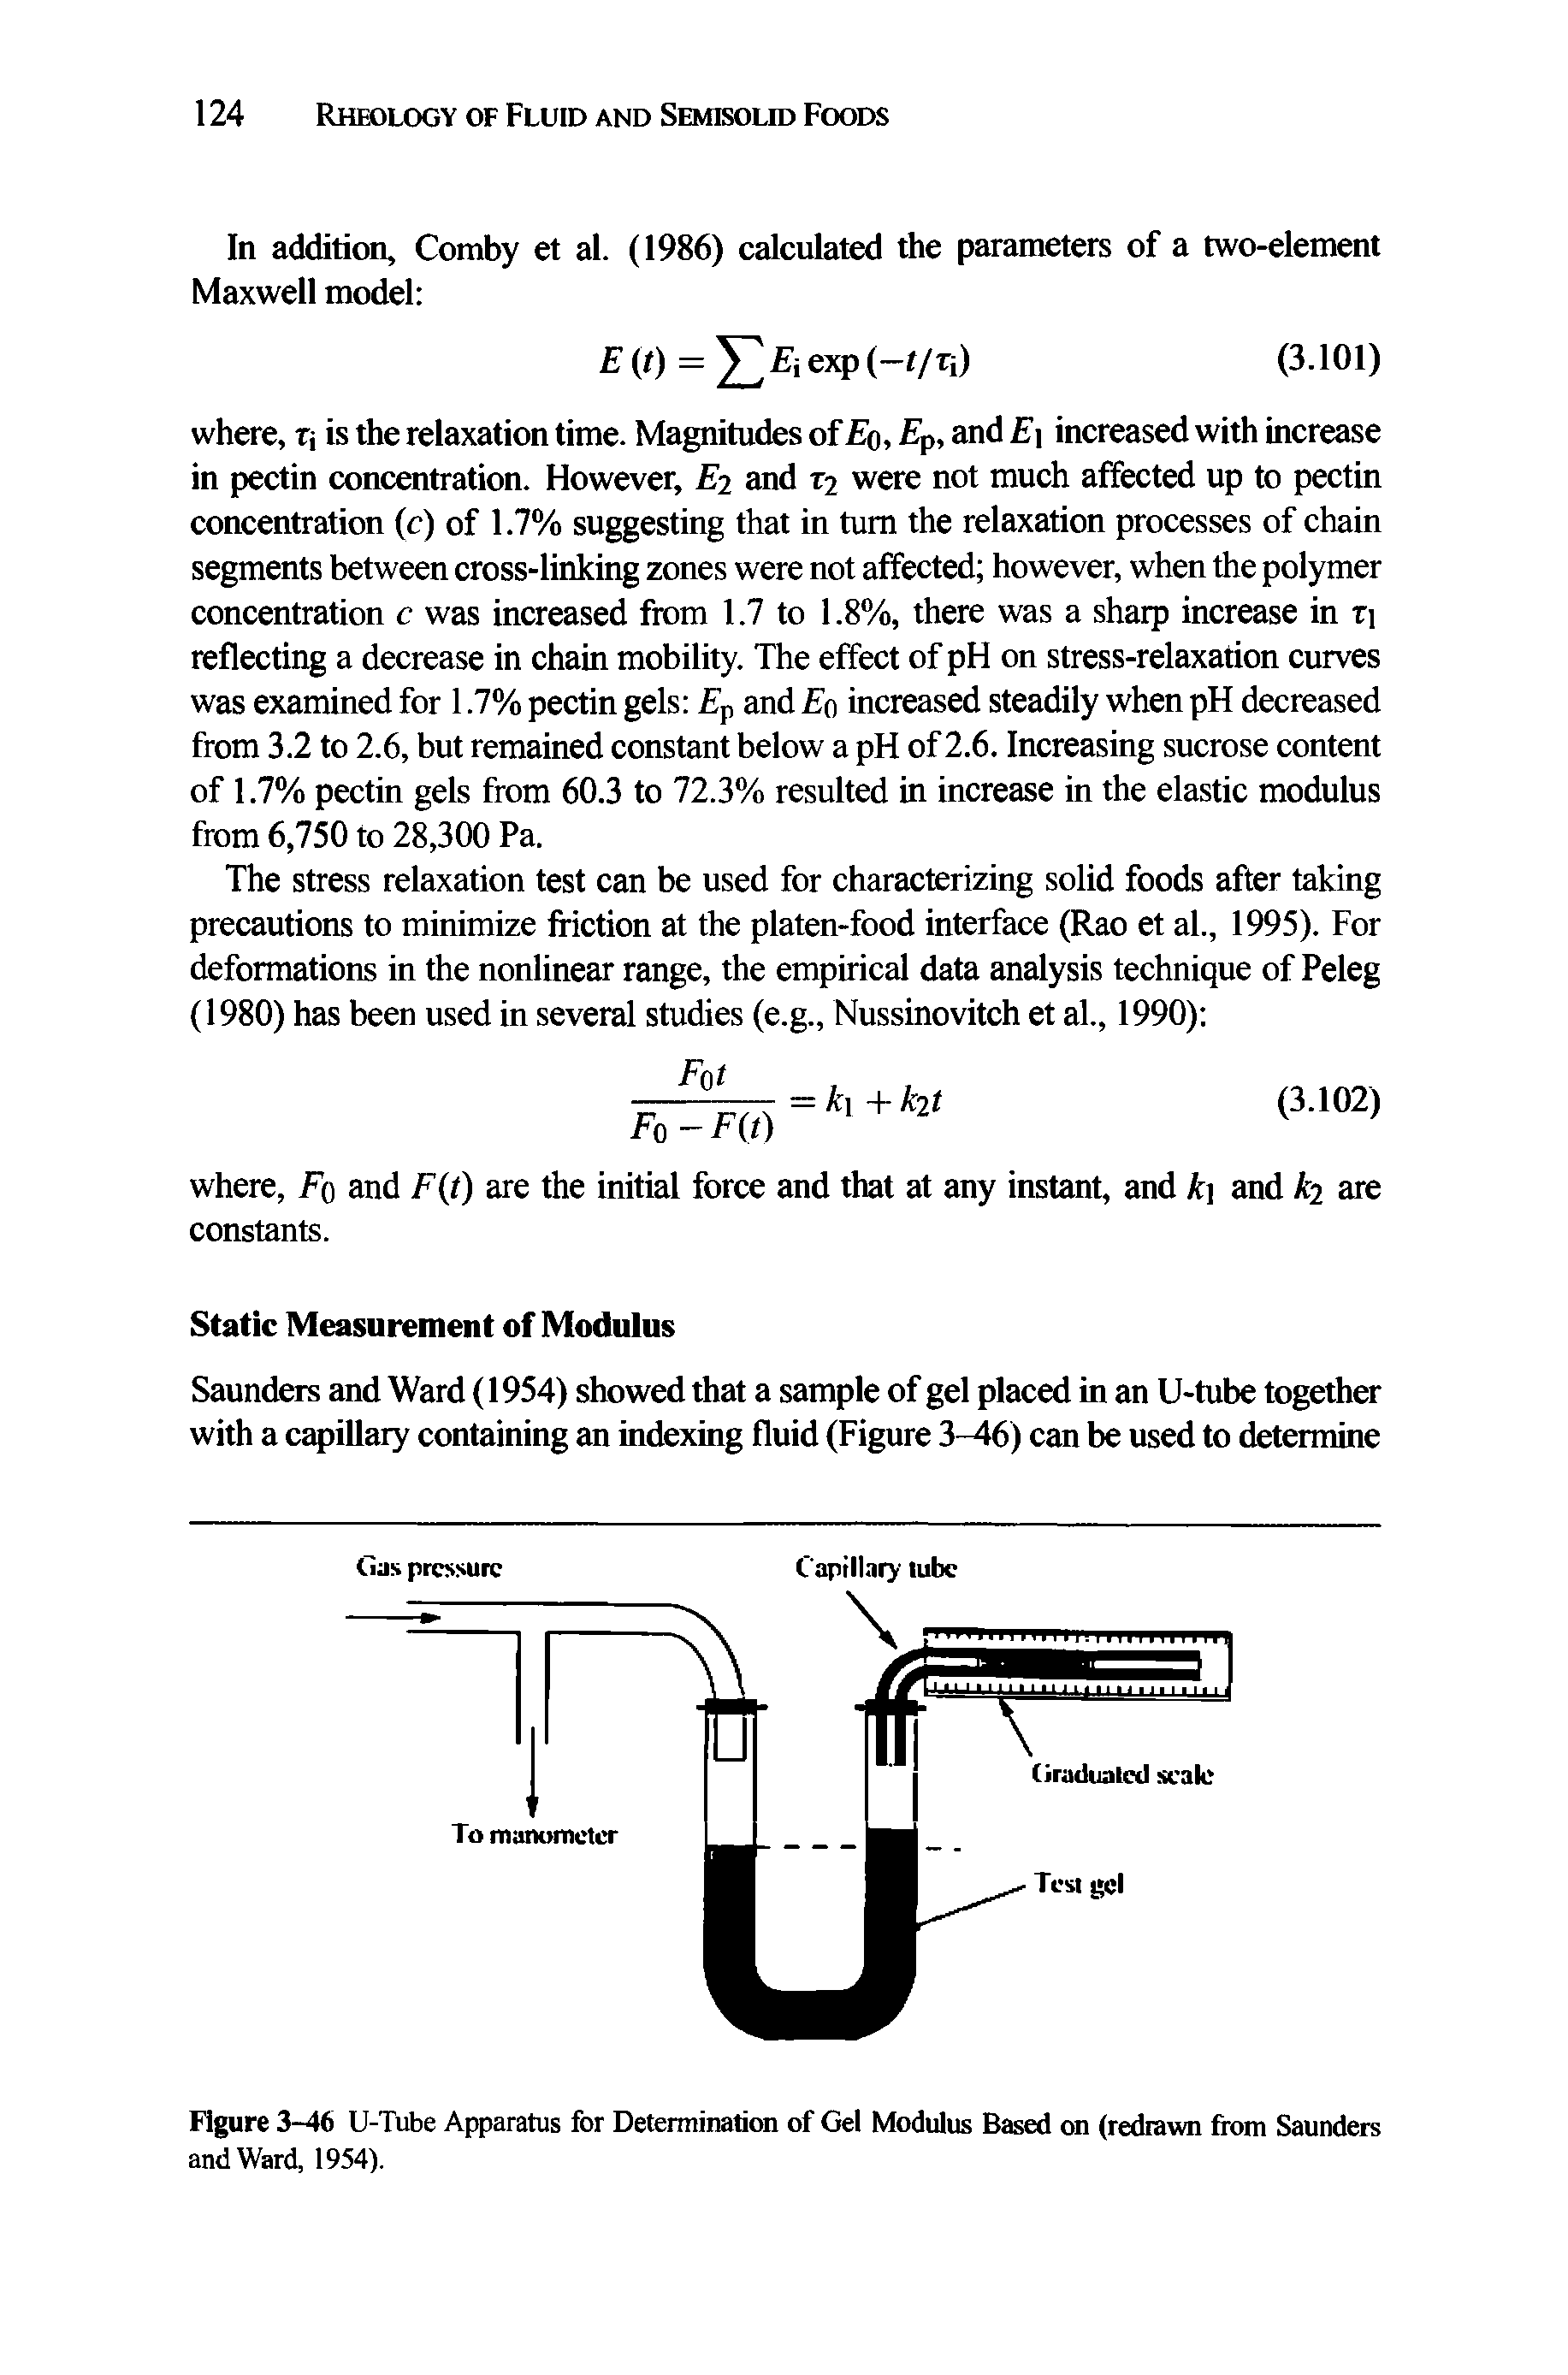 Figure 3-46 U-Tube Apparatus for Determination of Gel Modulus Based on (redrawn from Saunders and Ward, 1954).